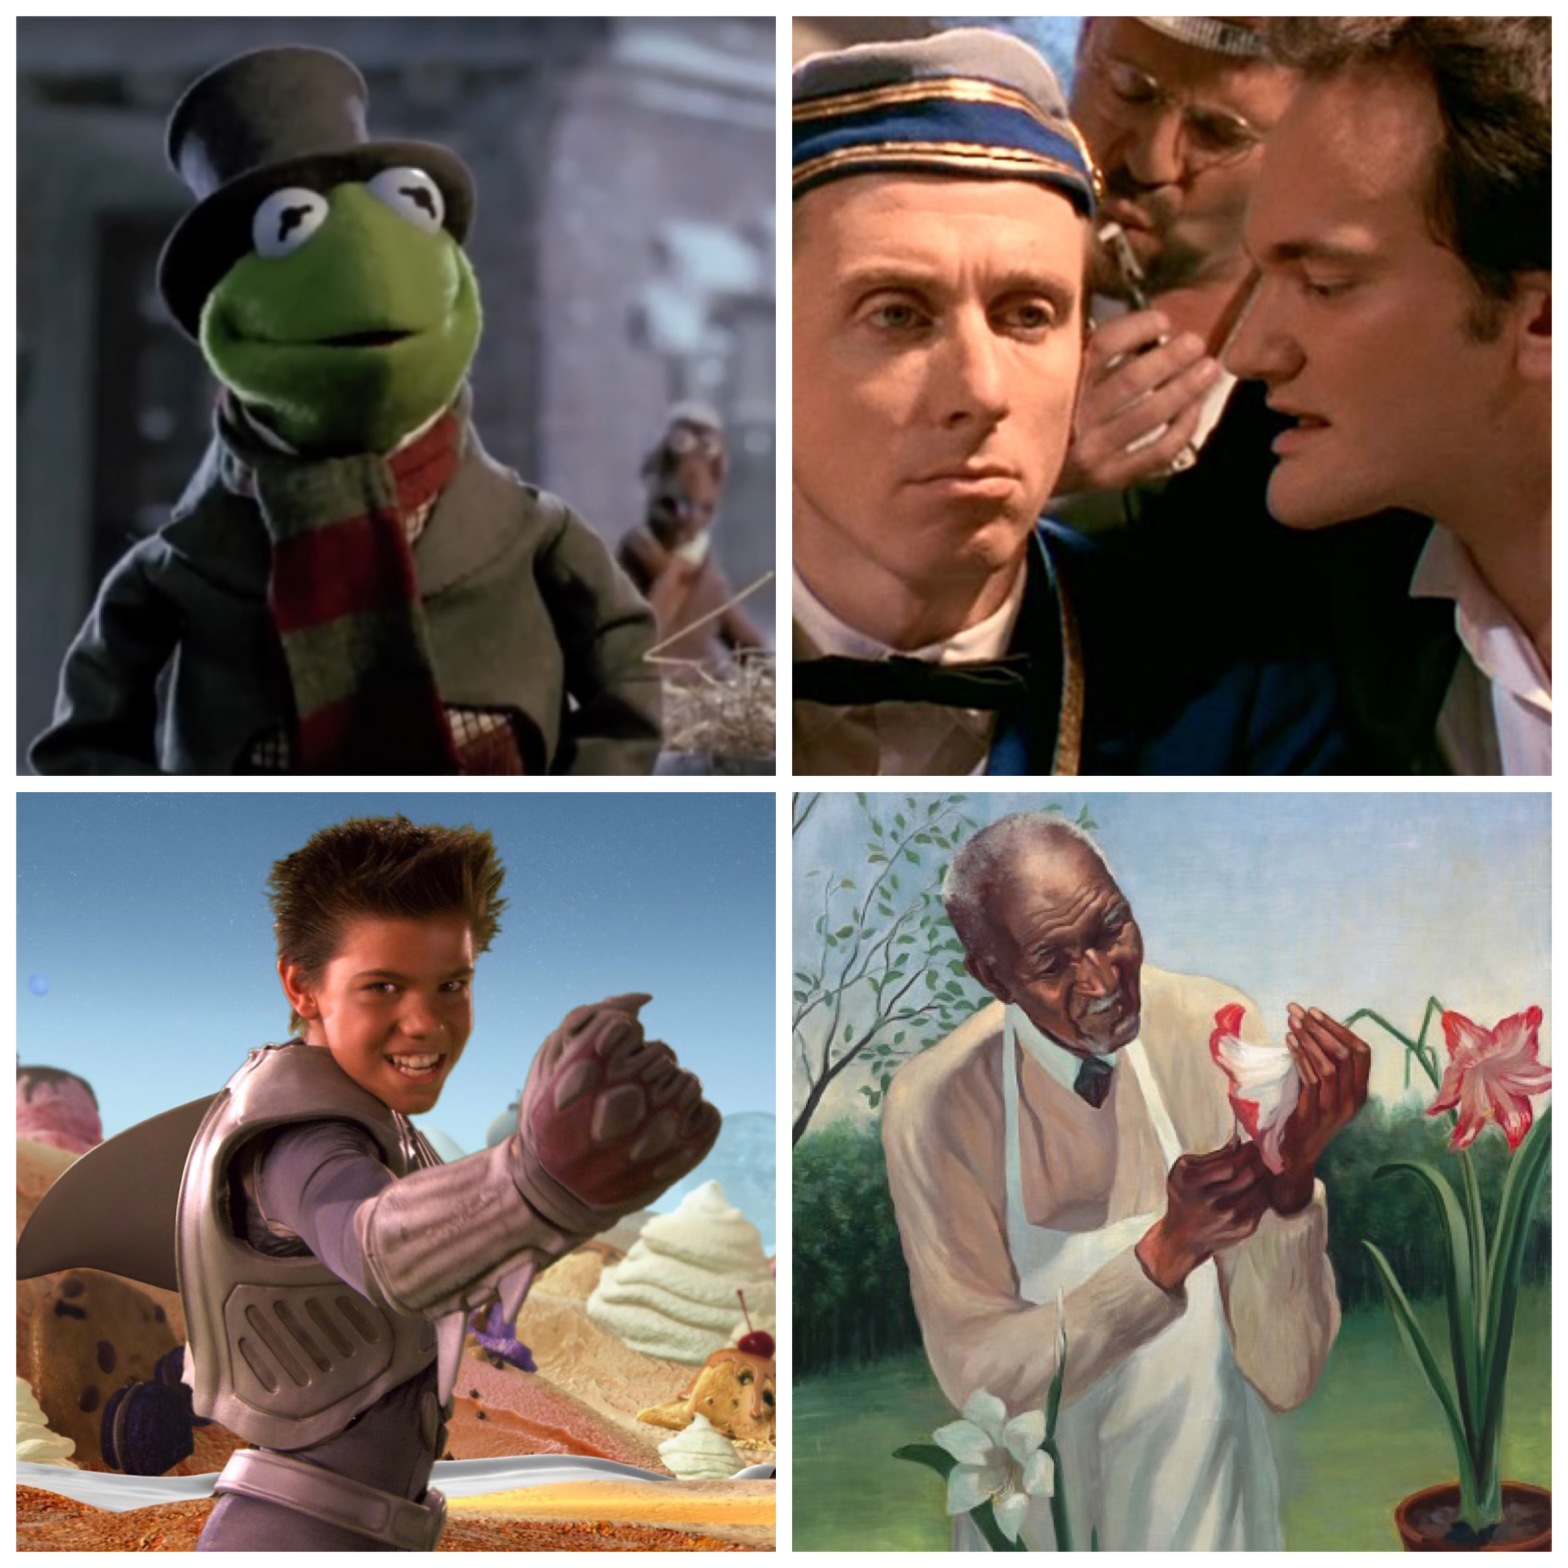 Kermit in The Muppet Christmas Carol, Tim Roth and Quentin Tarantino in Four Rooms, Taylor Lautner in The Adventures of Sharkboy and Lavagirl, and George Washington Carver.